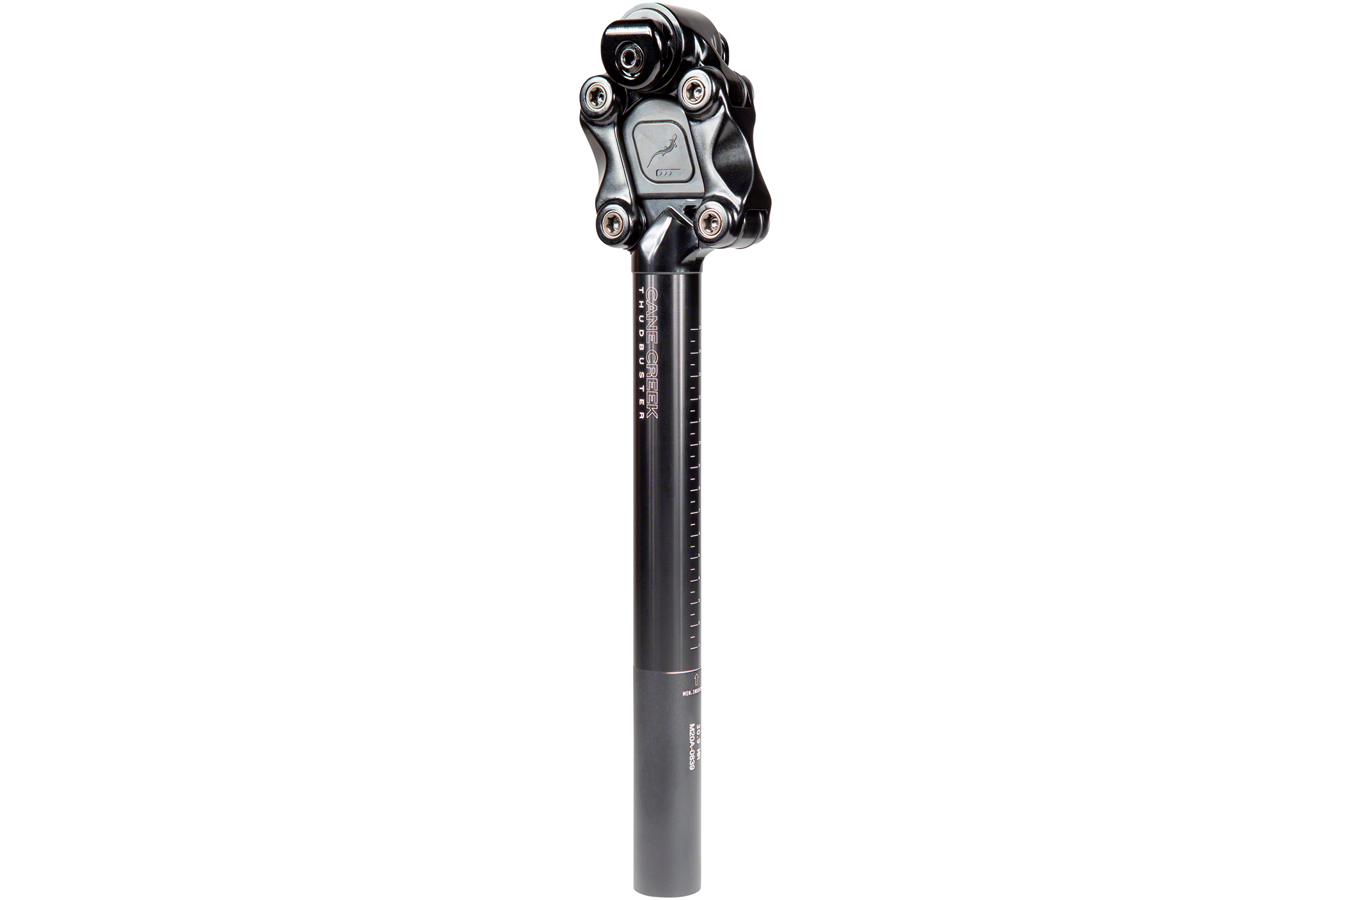 Cane Creek Suspension Seatpost G4 Thudbuster ST 31.6x375mm